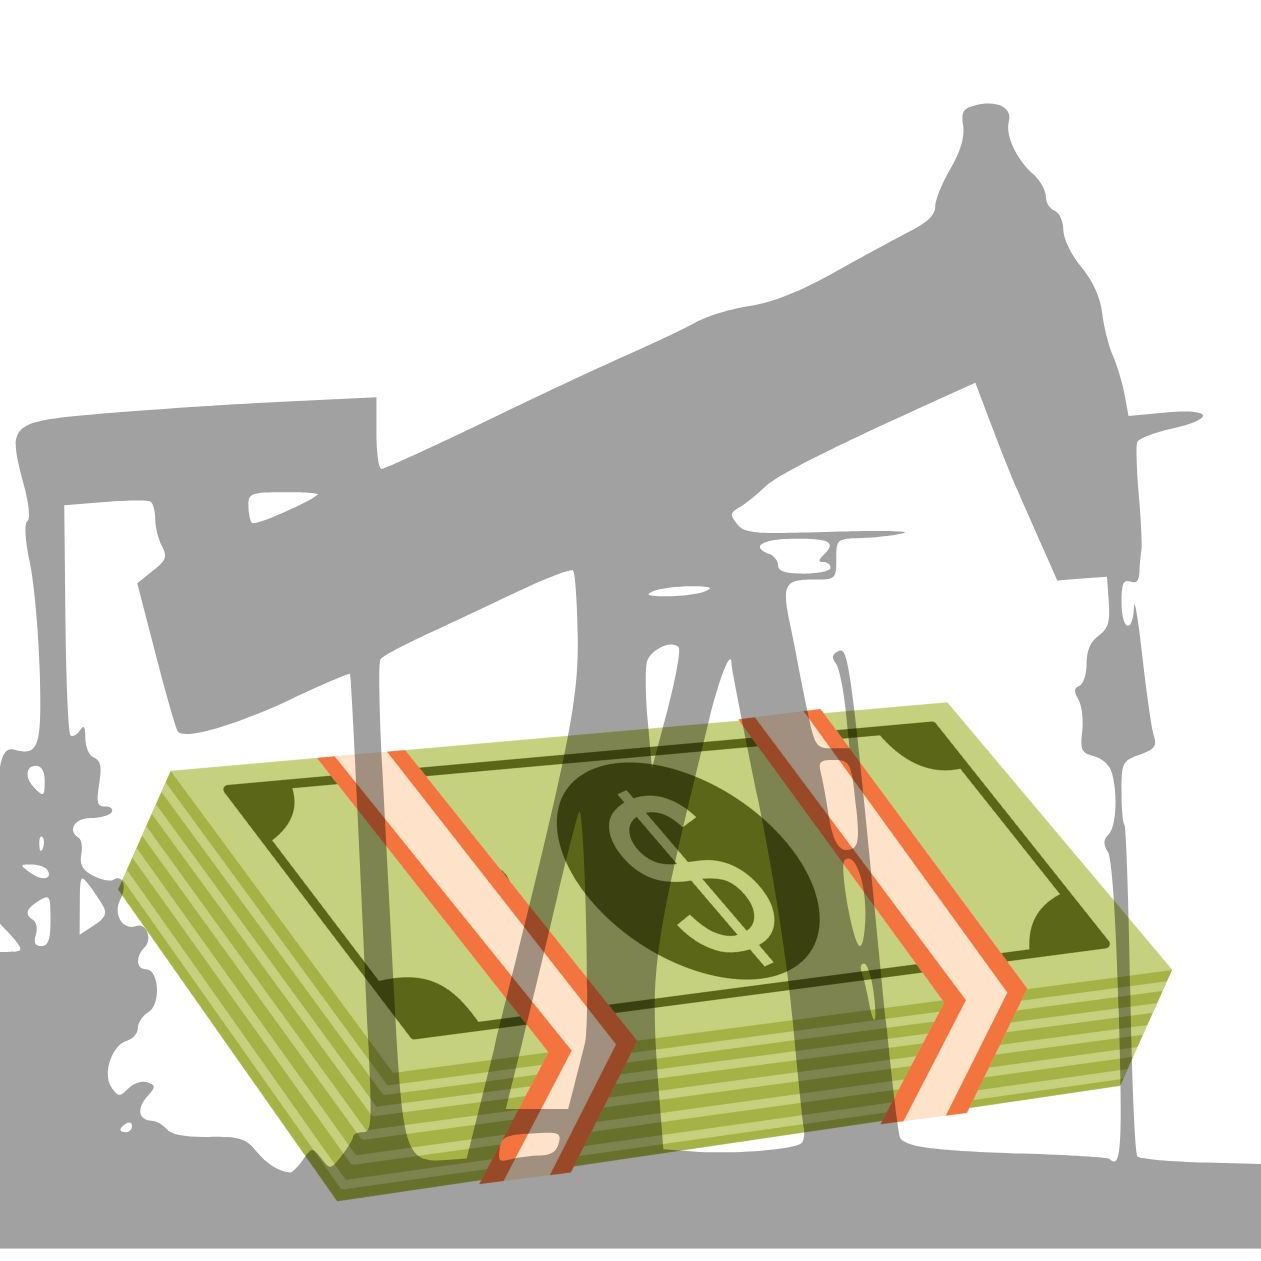 Dollar bills and oil rigs graphical illustration